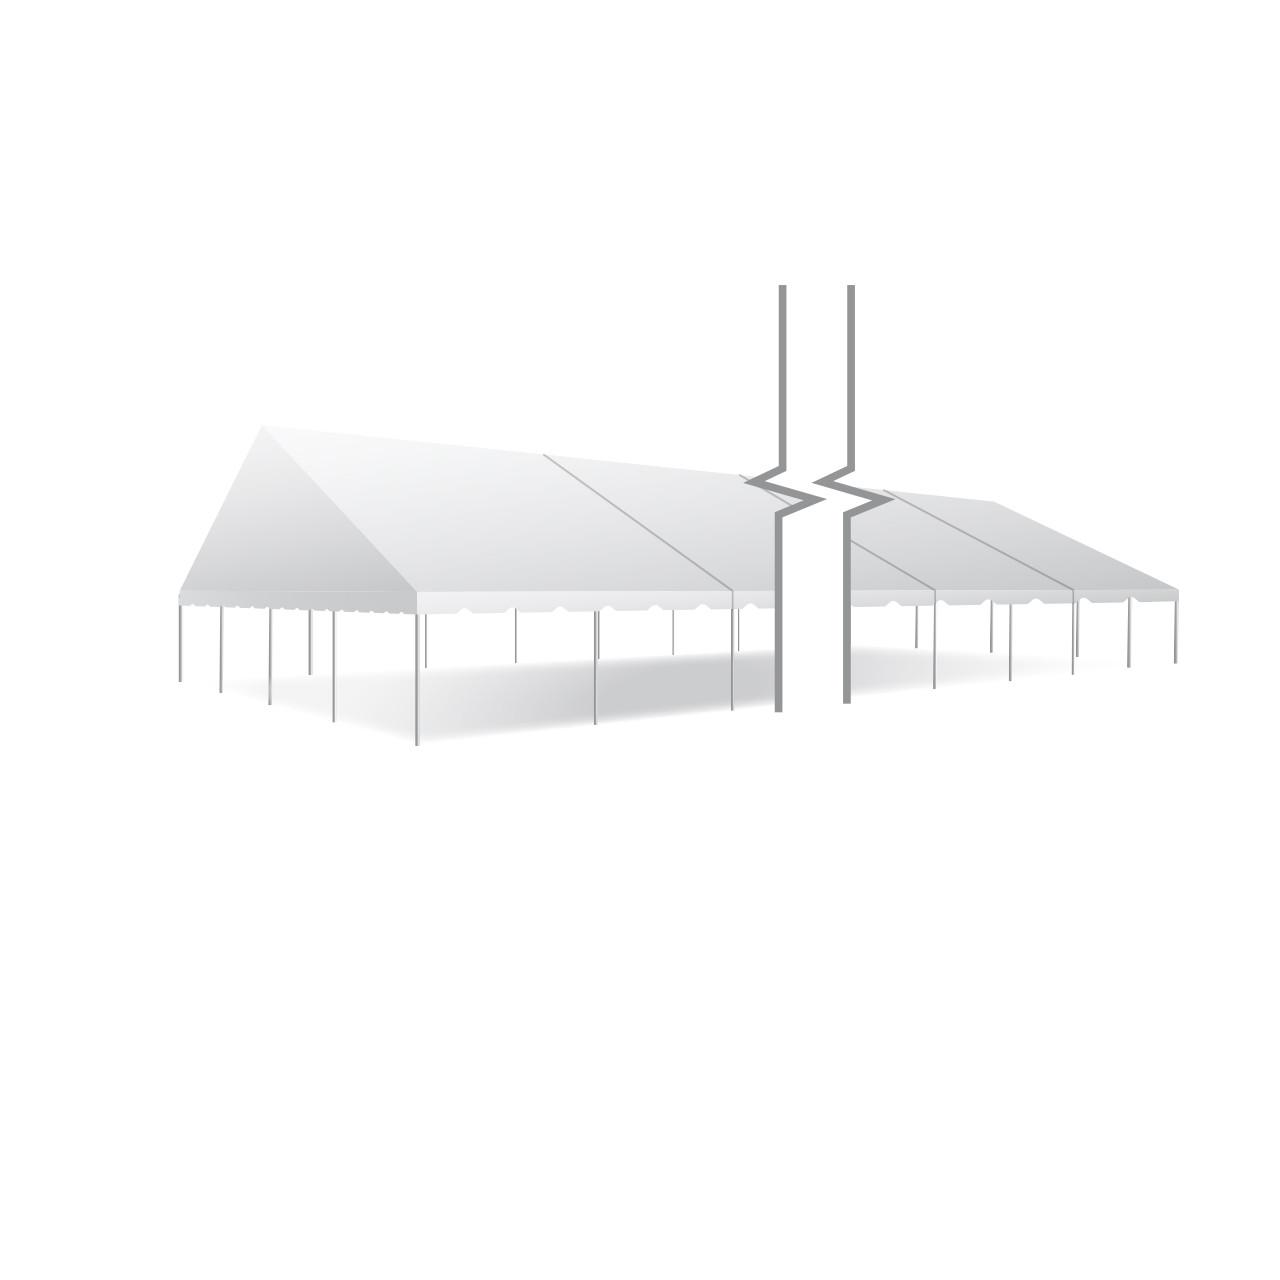 40' x 240' Classic Series Gable End Frame Tent, Sectional Tent Top, Complete